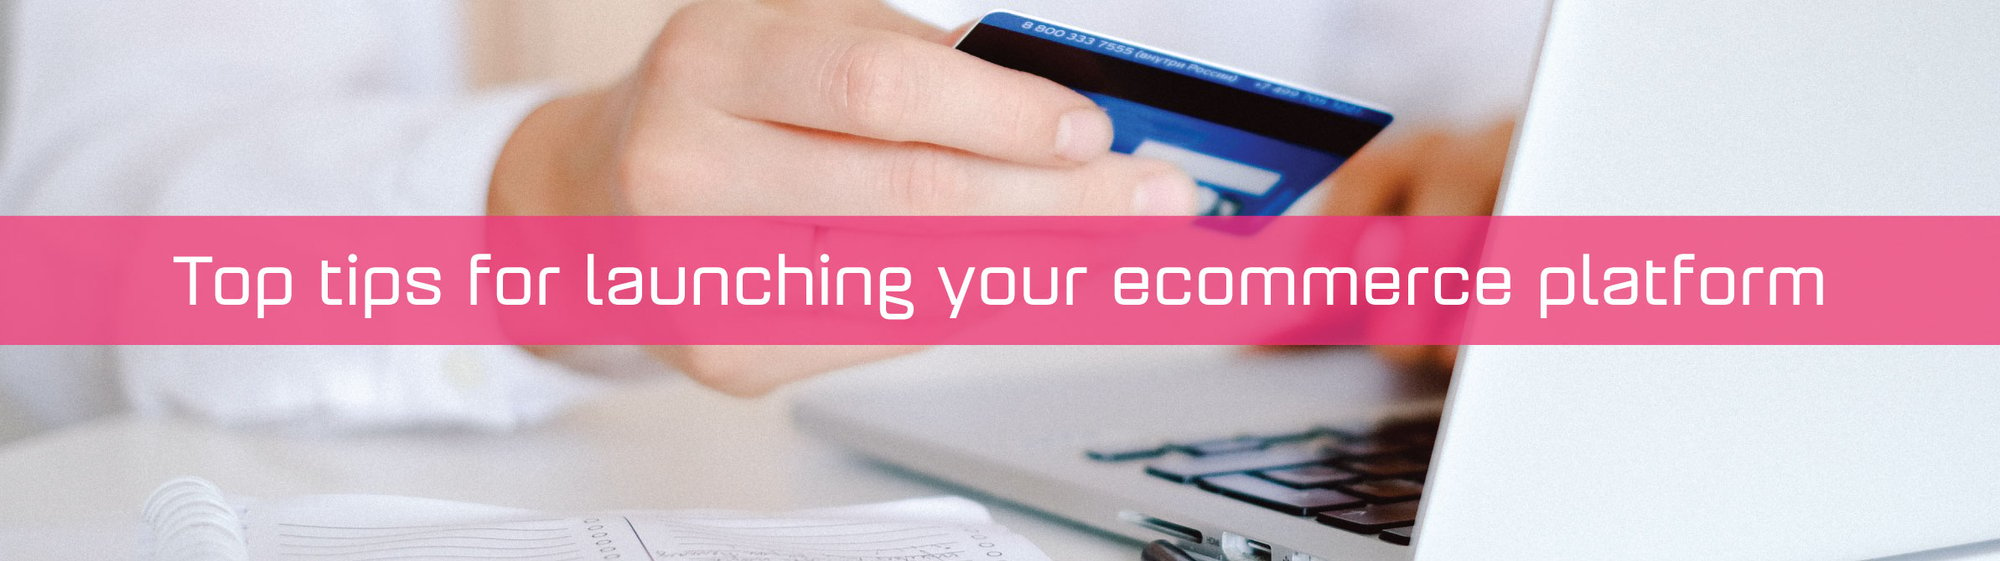 A hand holding a credit card infront of a laptop with a strap saying Top tips for launching your ecommerce website